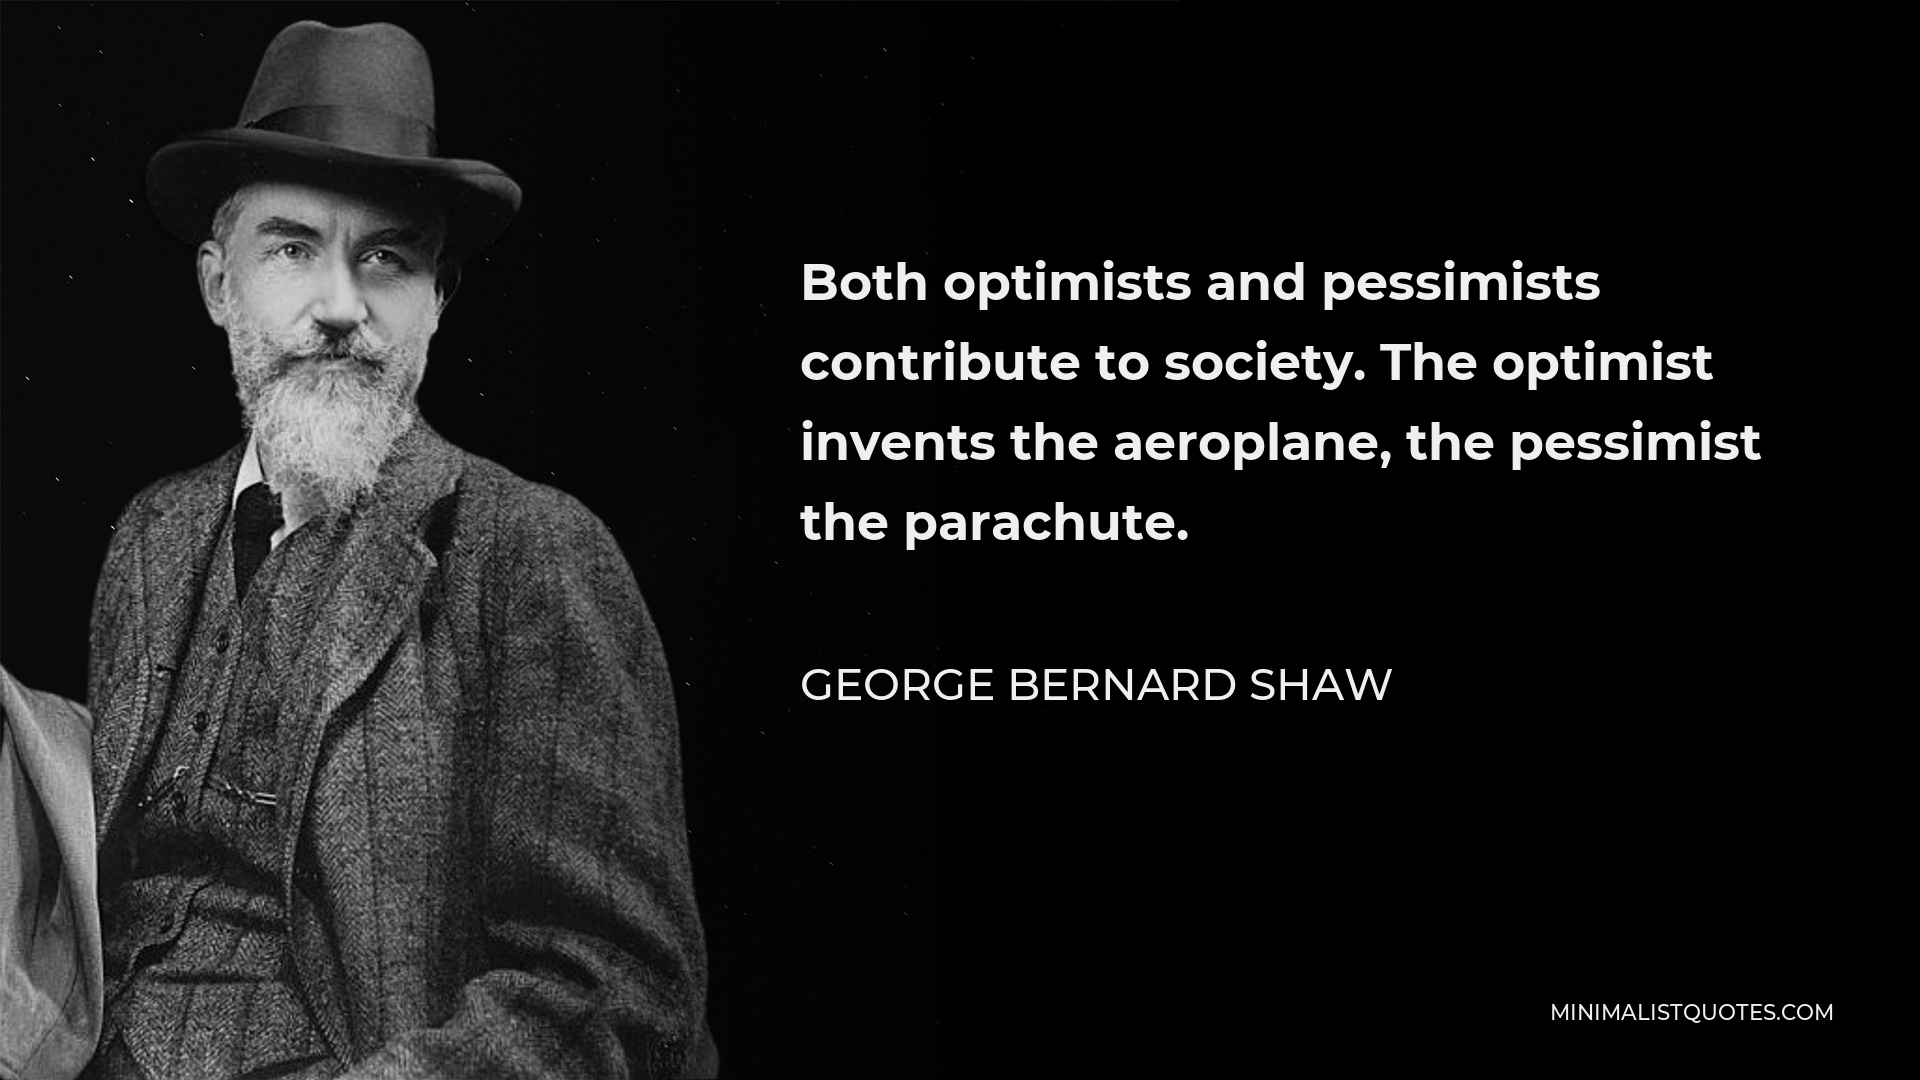 George Bernard Shaw Quote - Both optimists and pessimists contribute to society. The optimist invents the aeroplane, the pessimist the parachute.